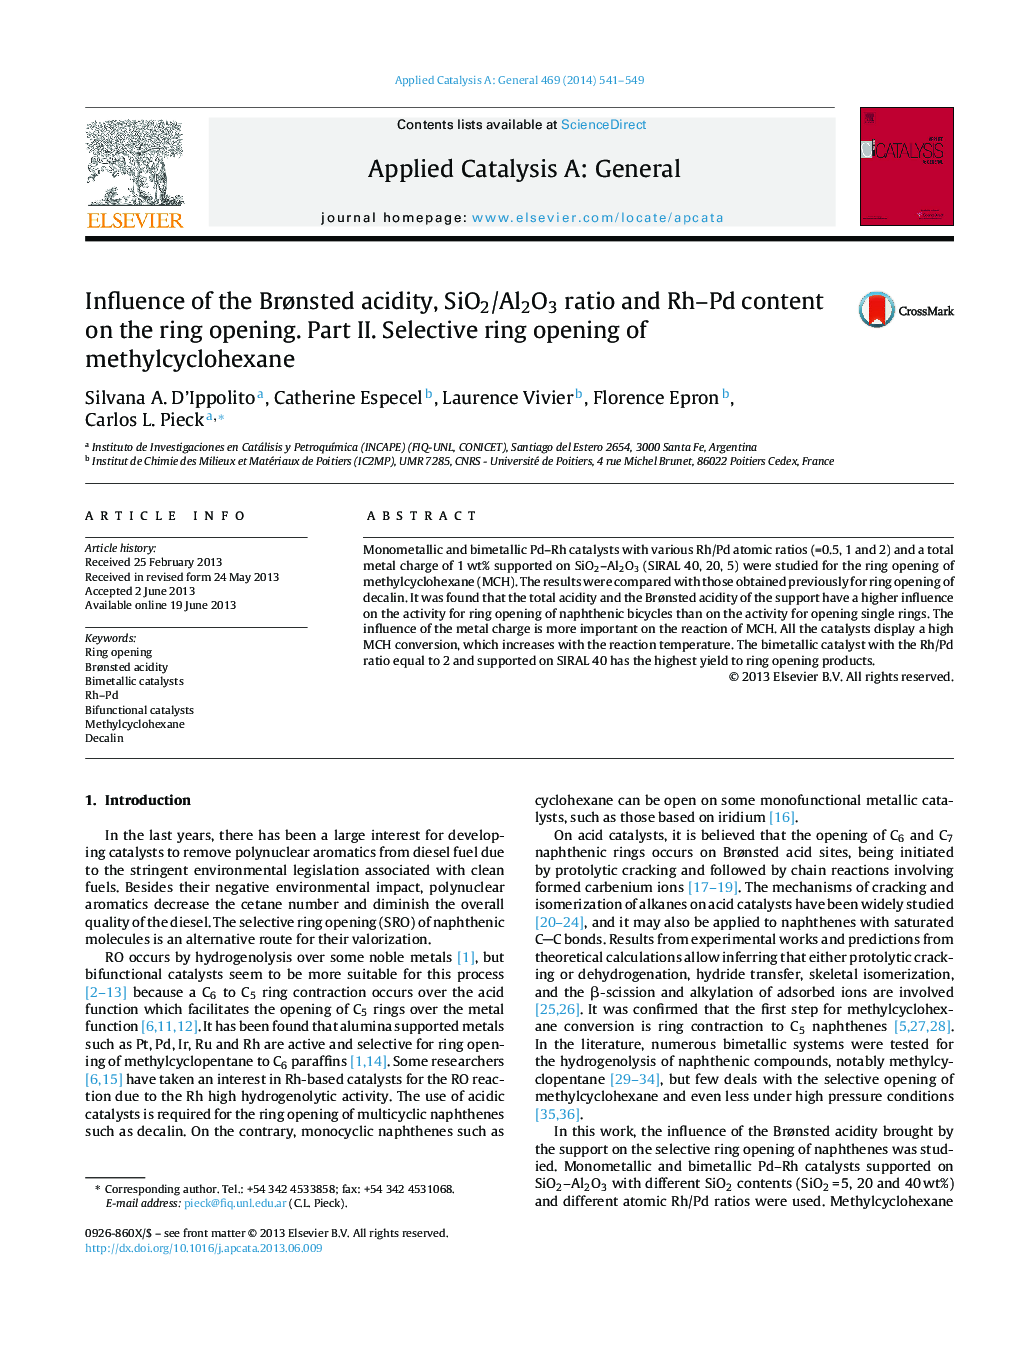 Influence of the Brønsted acidity, SiO2/Al2O3 ratio and Rh–Pd content on the ring opening. Part II. Selective ring opening of methylcyclohexane